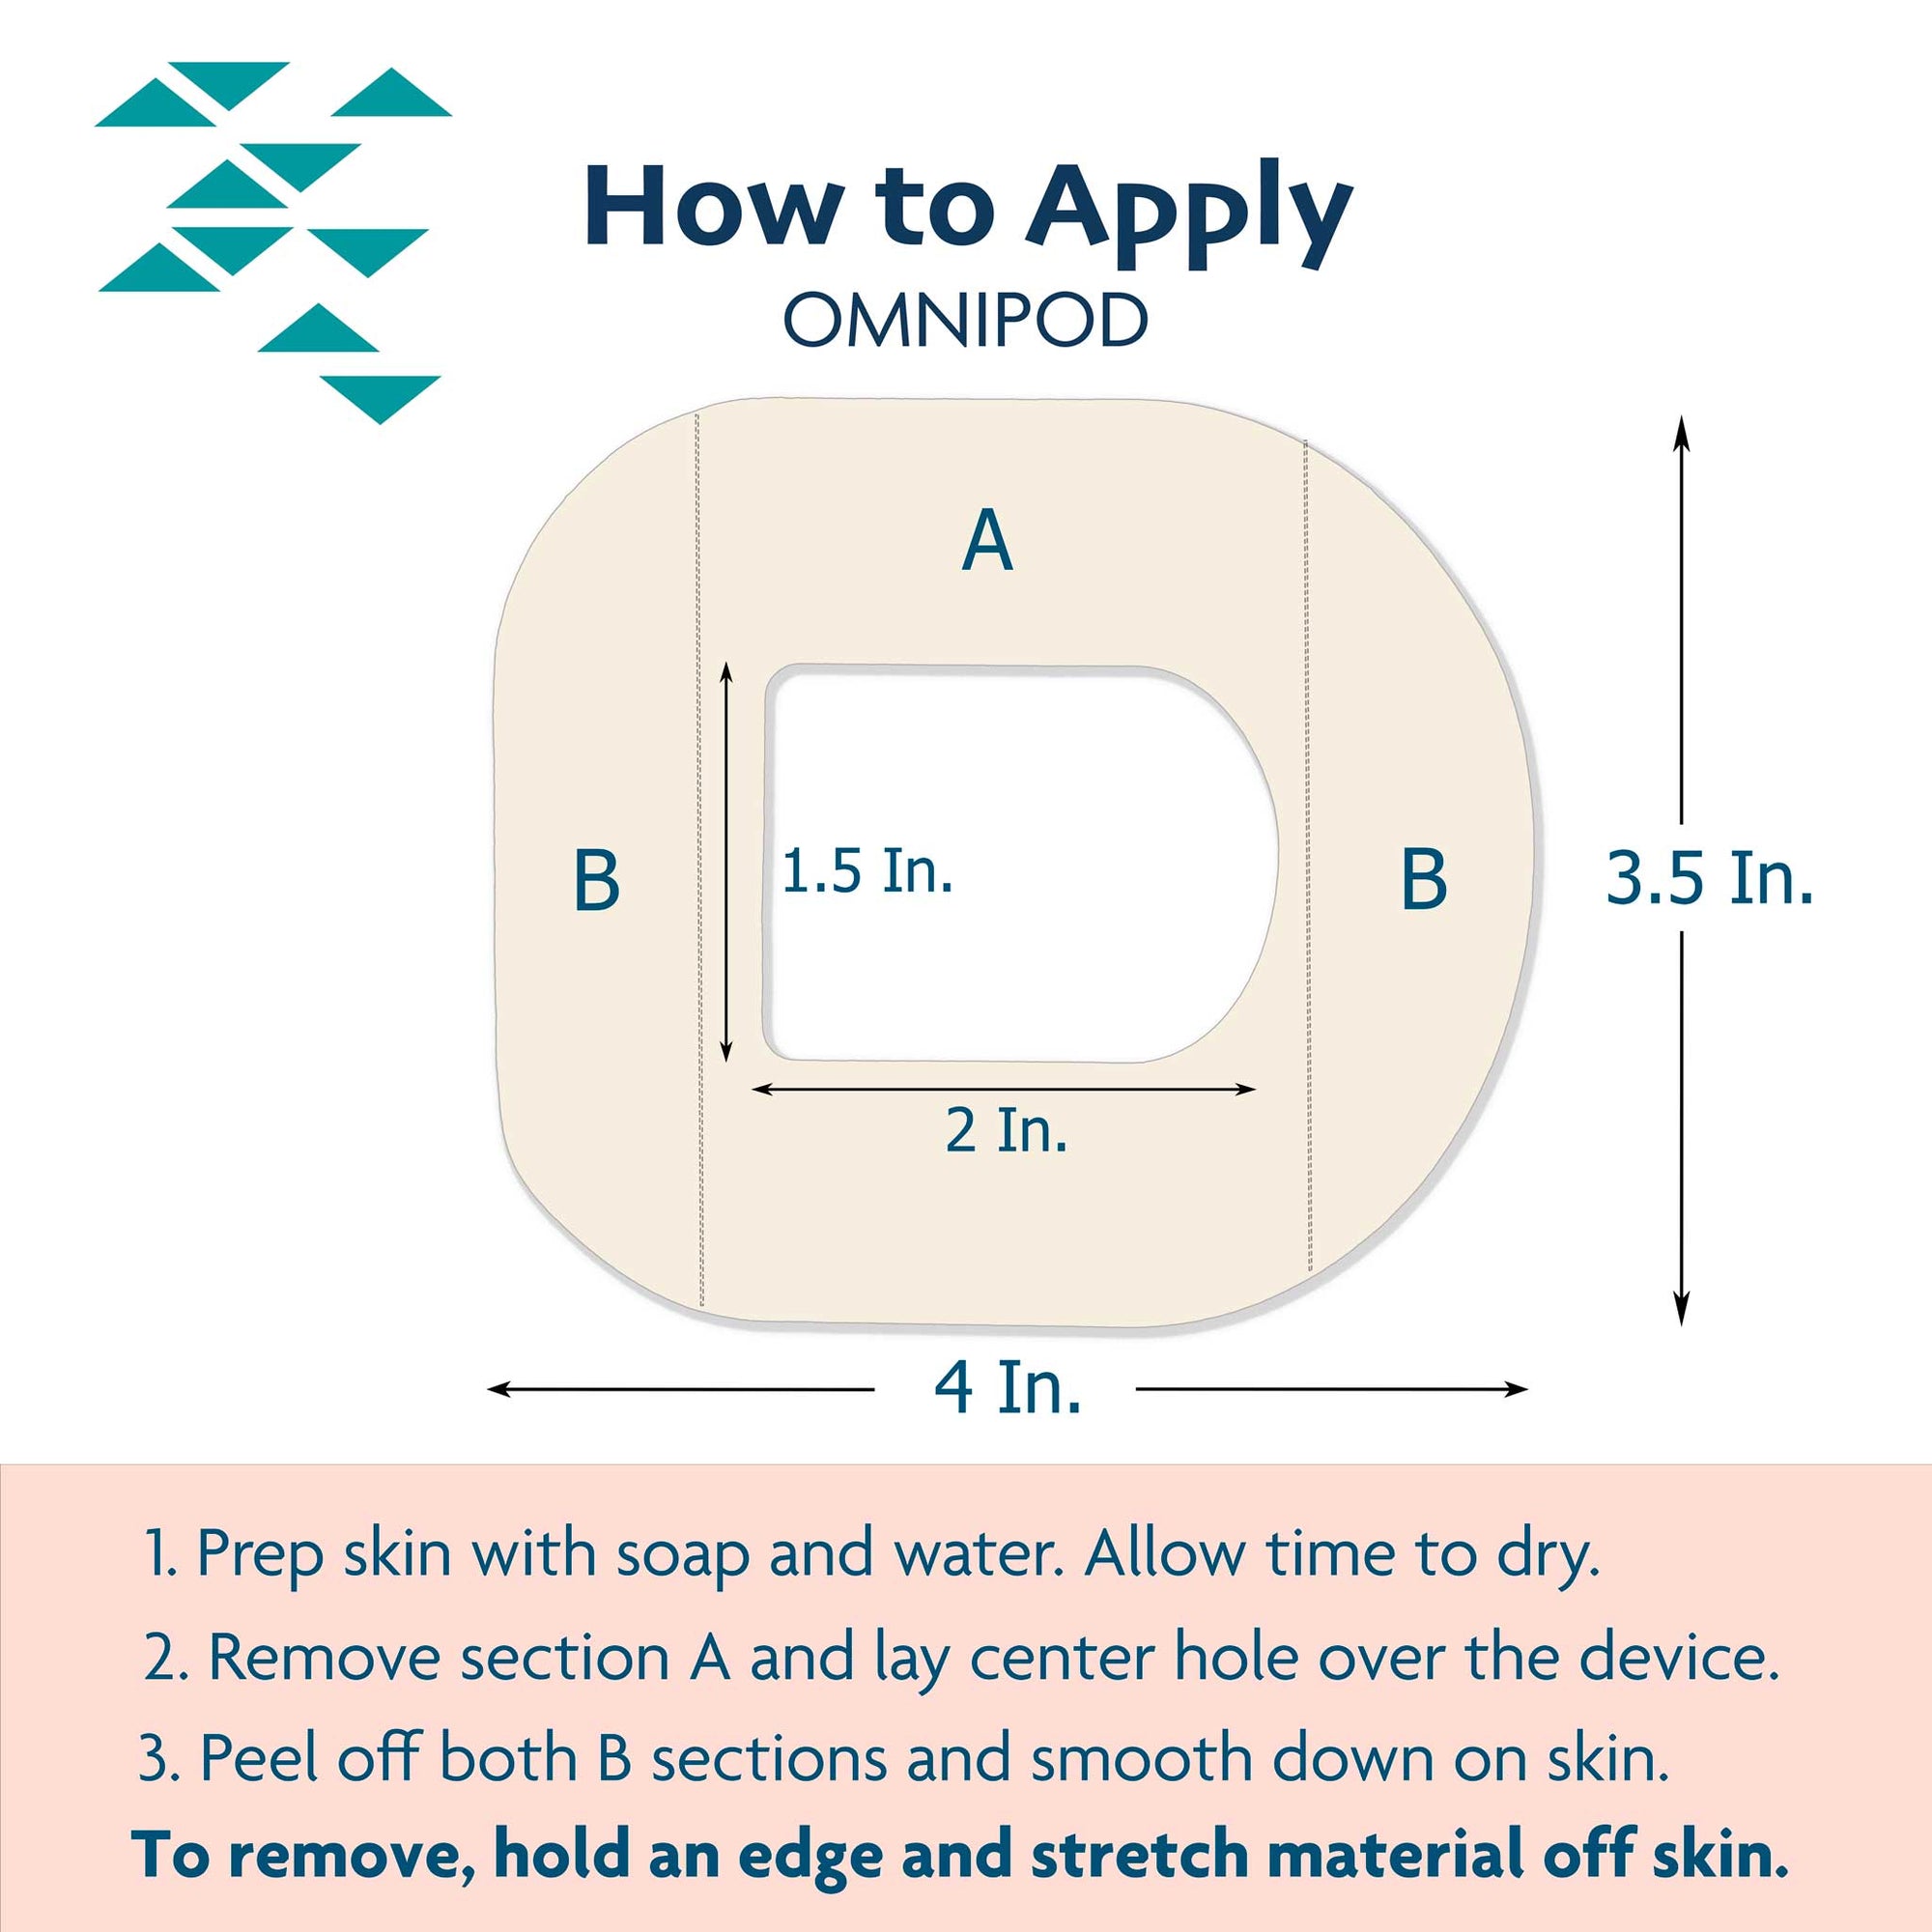 Secure the Omnipod effectively with pump tape application instructions